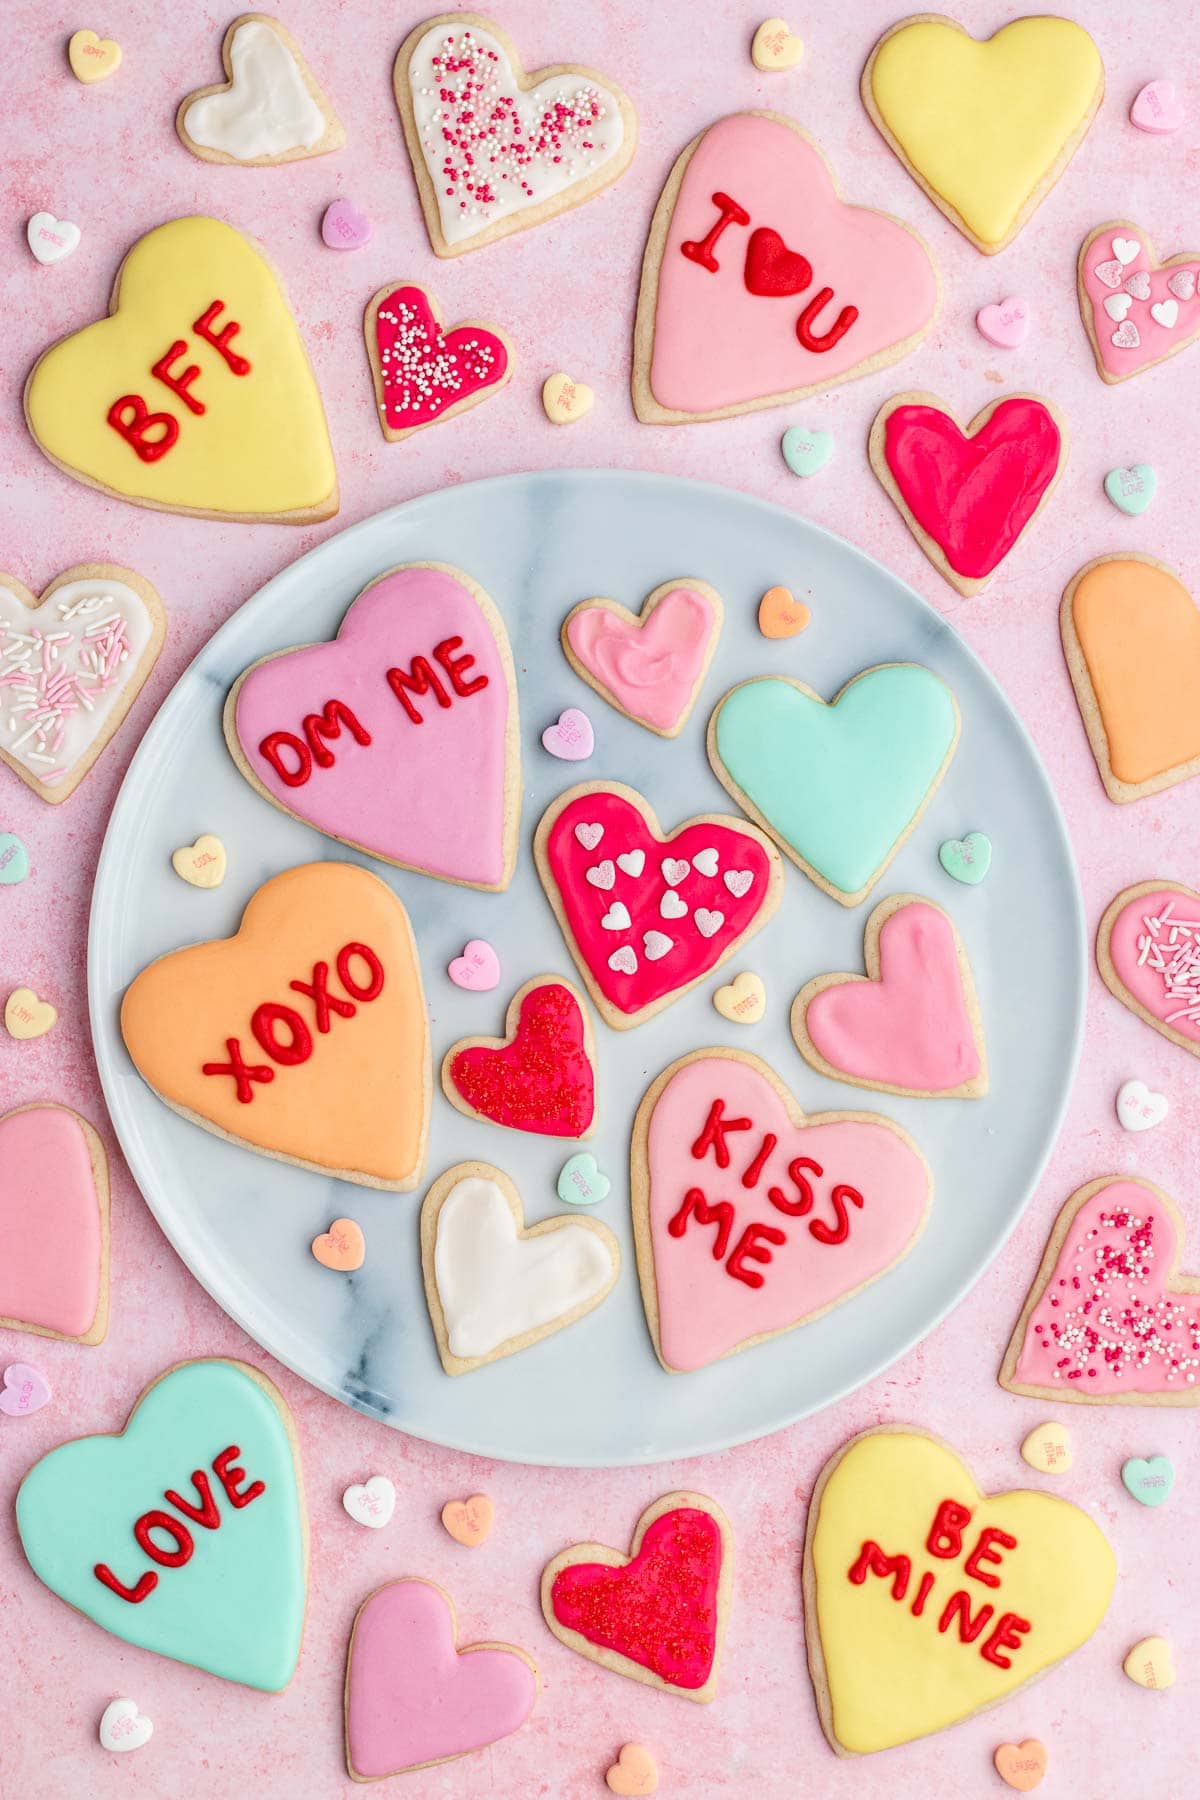 variations on heart cookies with various colors and little frases like XOXO and Kiss Me